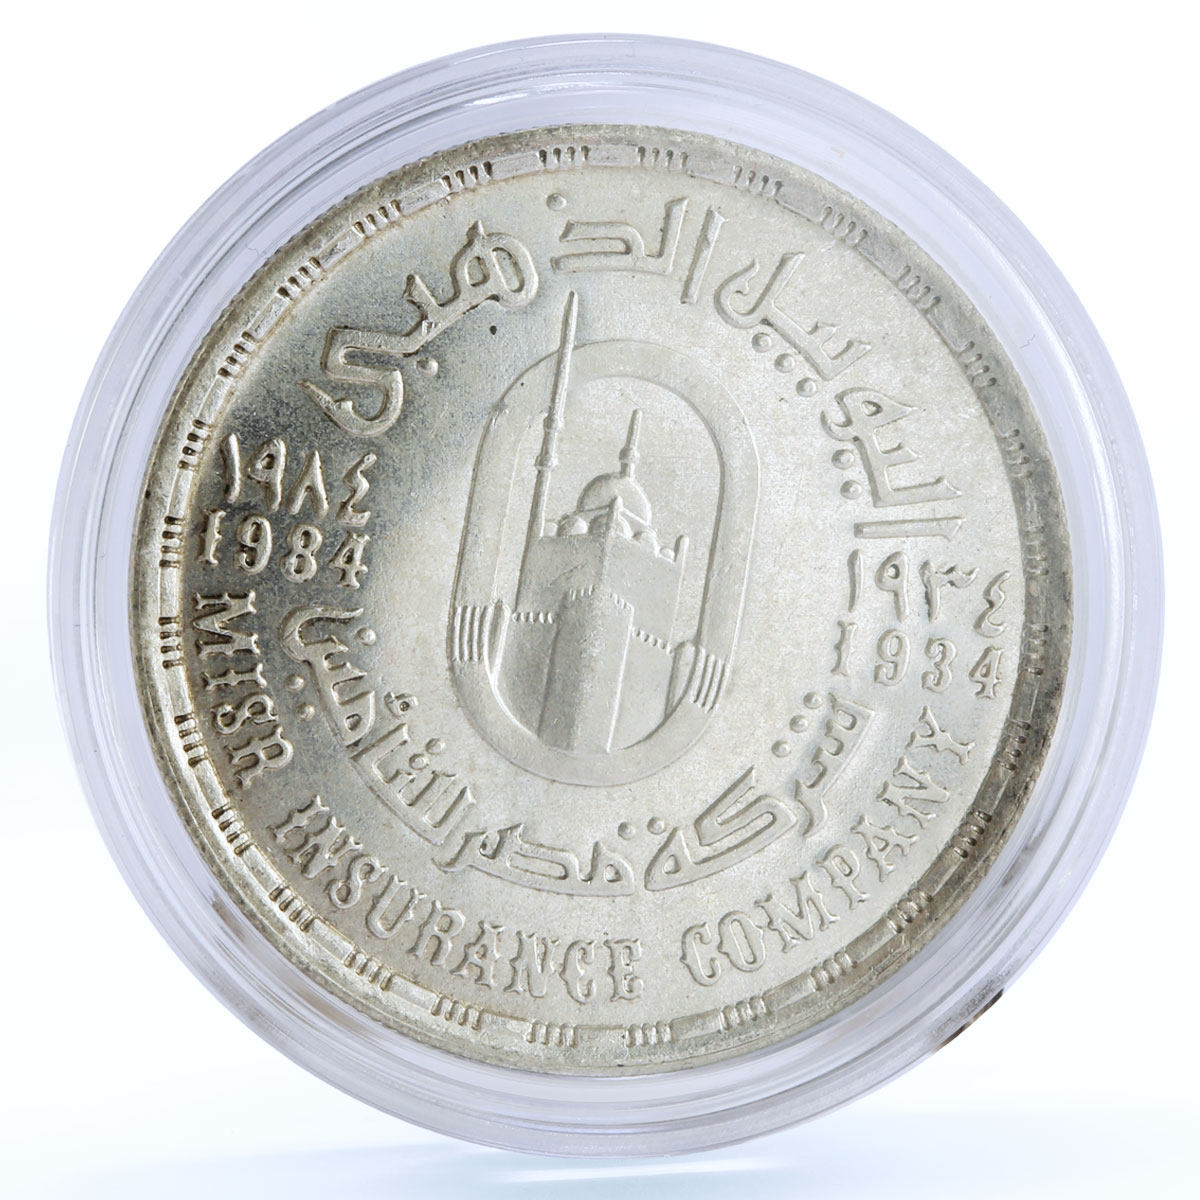 Egypt 1 pound 50 Years to Misr Insurance Company silver coin 1984